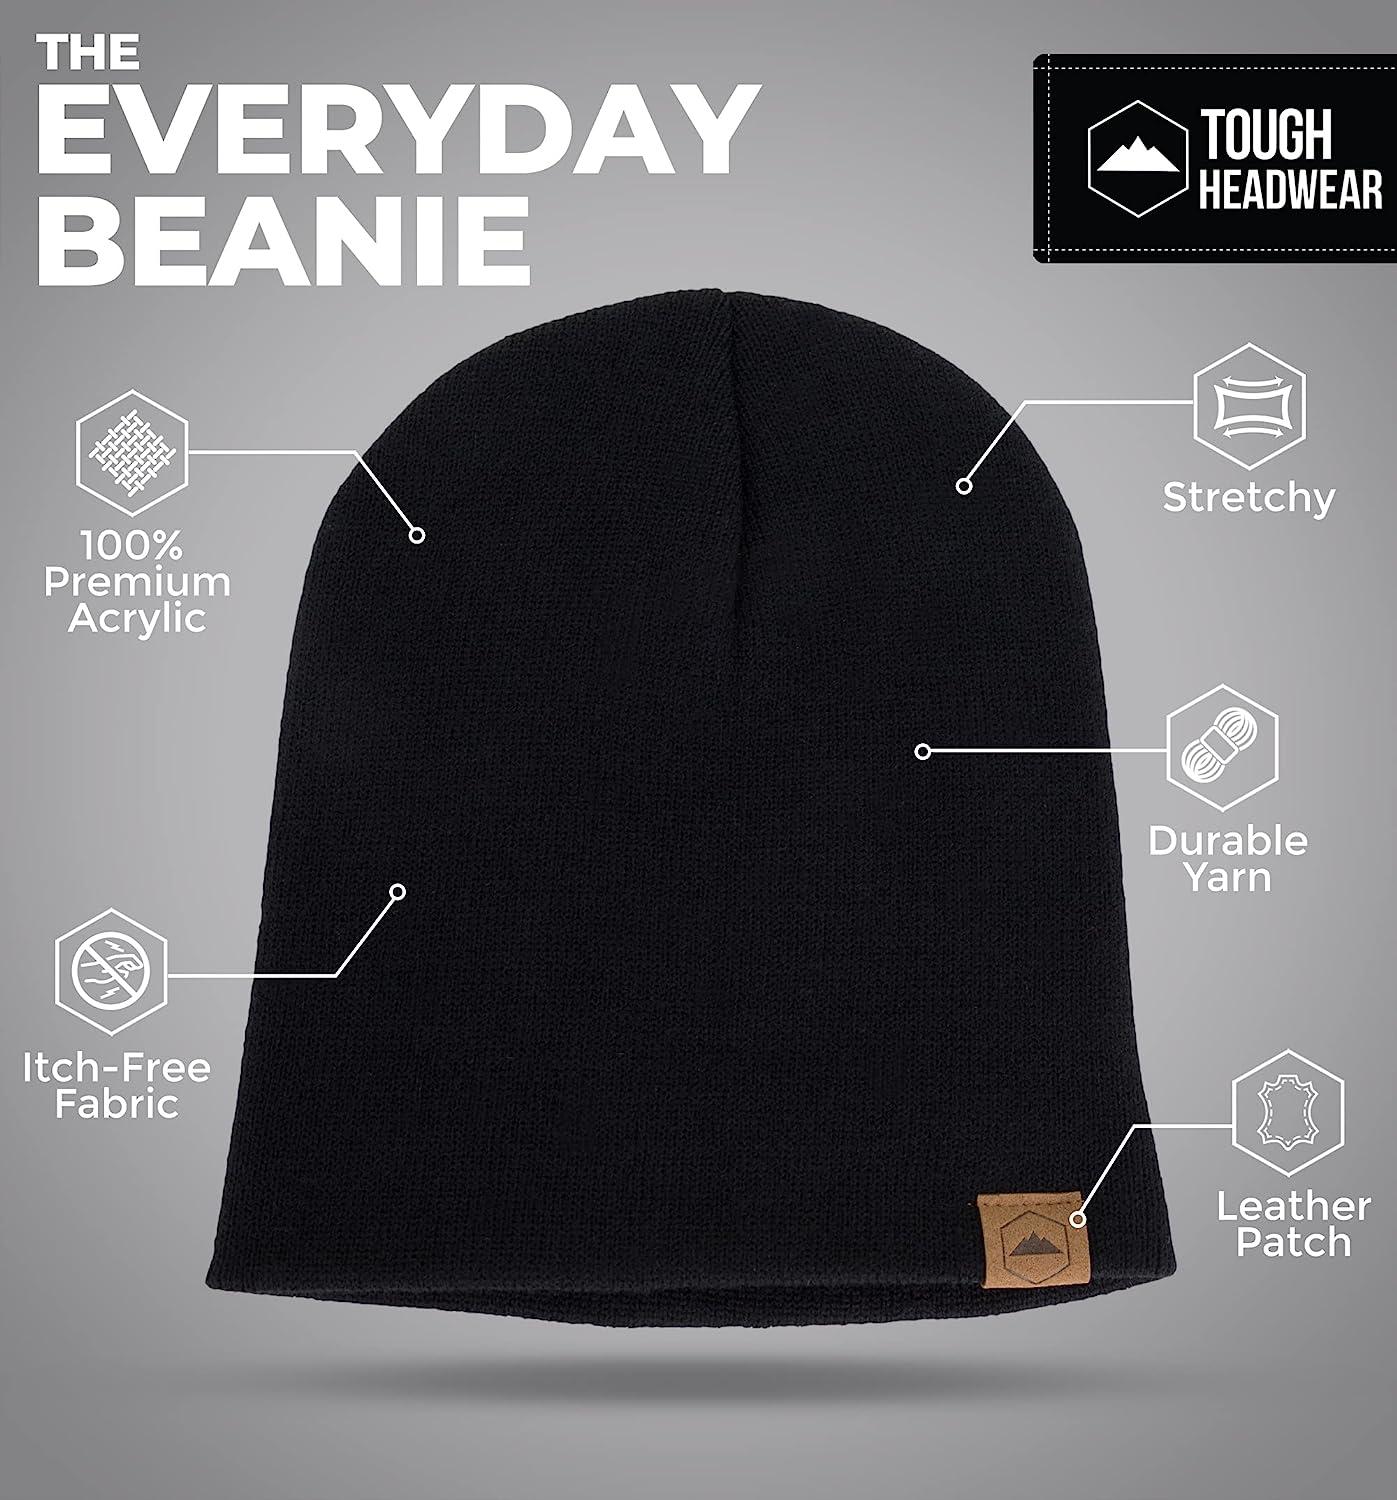 Tough Headwear Knit Beanie Skate Cold Hat, Men for - Women Black for Warm Winter Weather - Cap Stocking Size Toboggan Cap Ribbed and Hat One